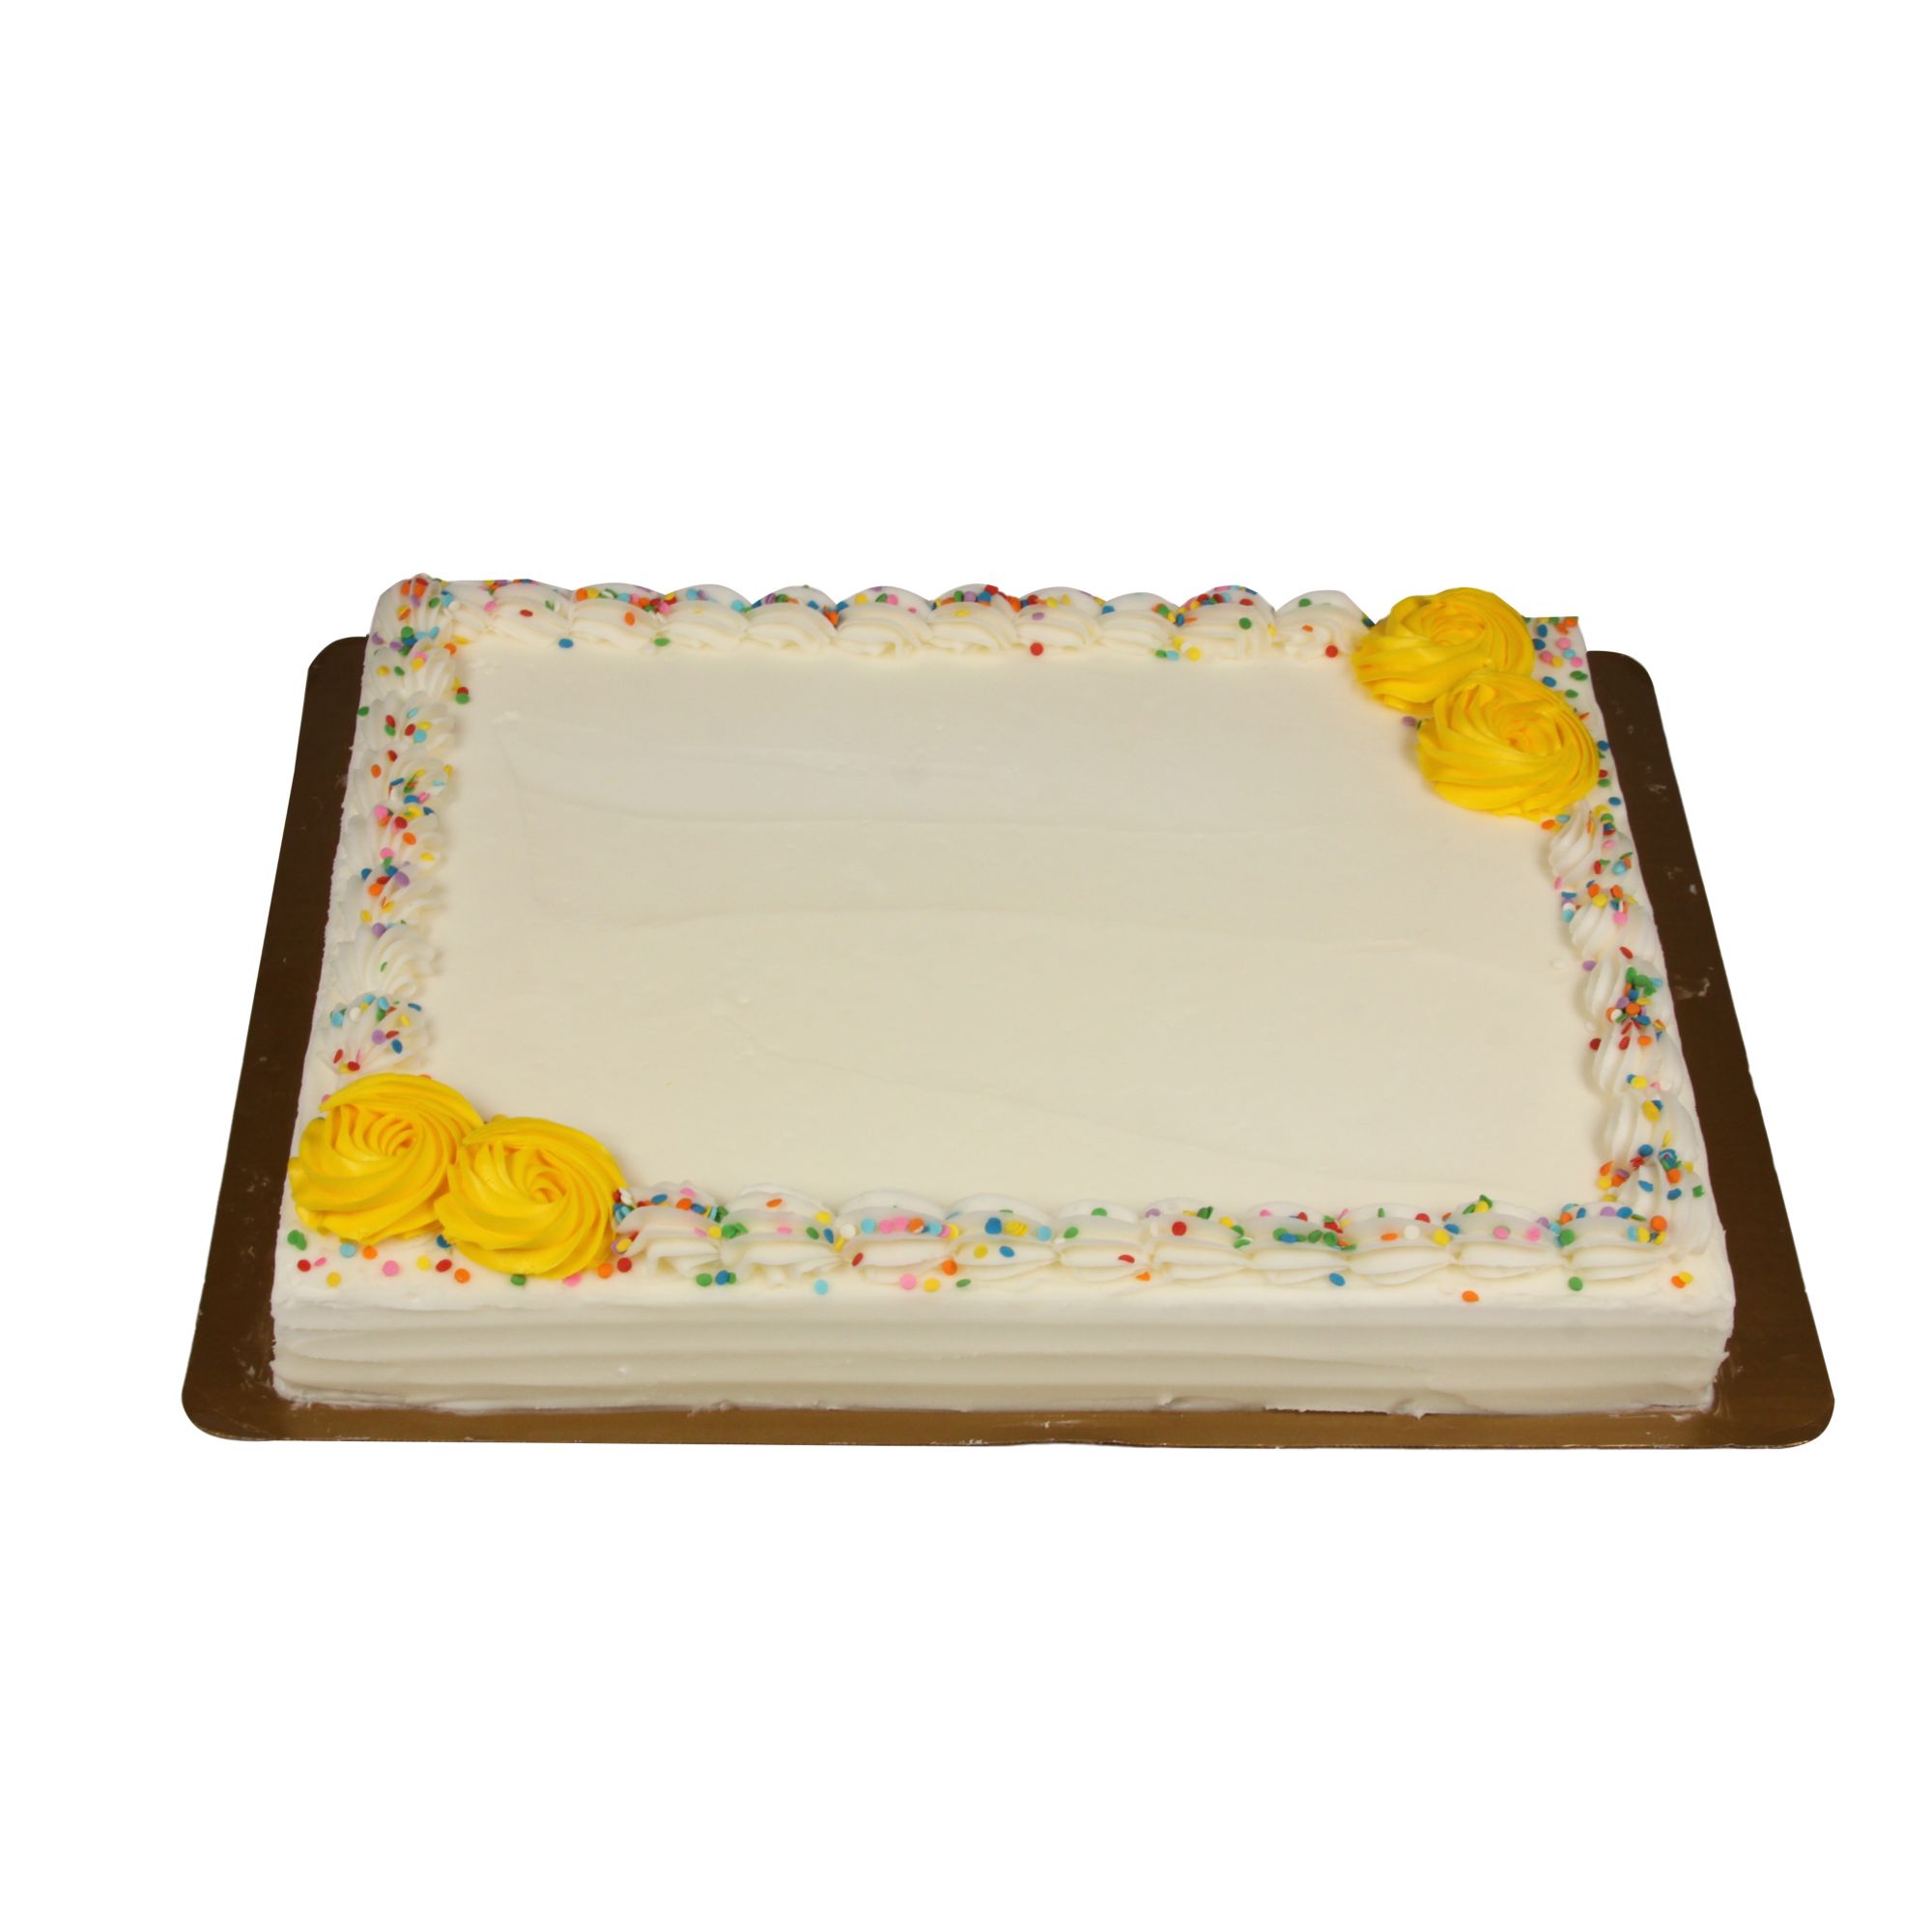 Wellsley Farms 1/2 Sheet Decorated Cake | BJ\'s Wholesale Club